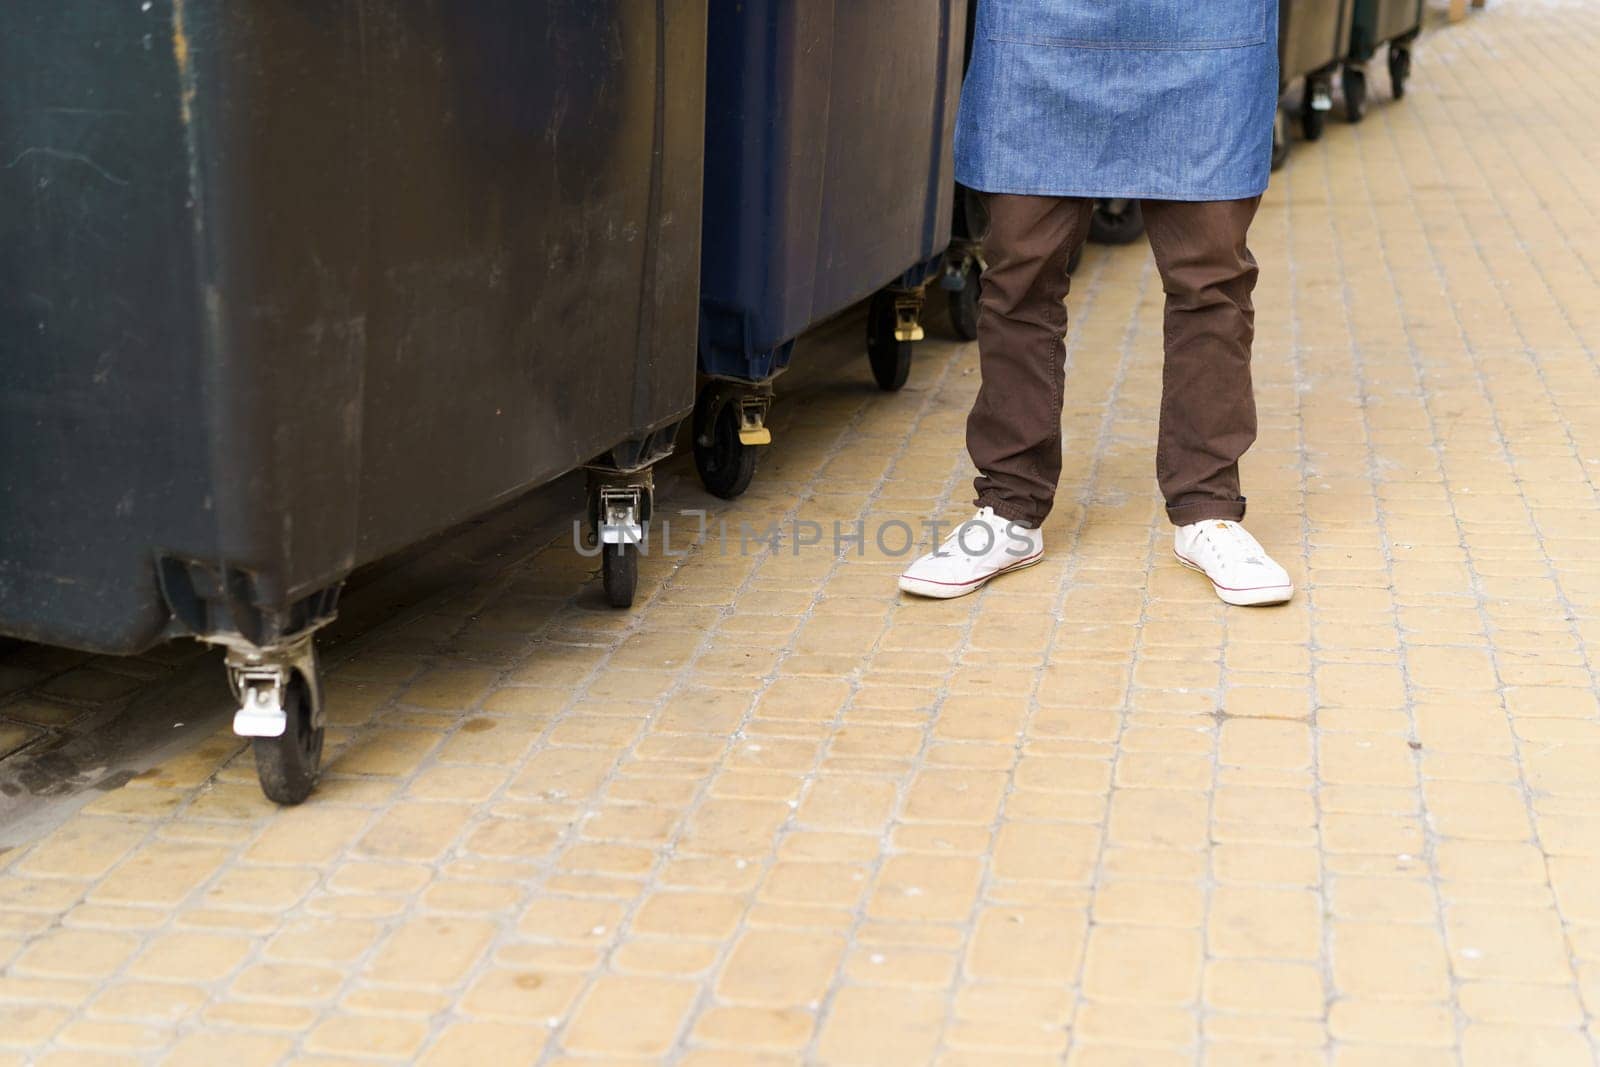 Garbage city trash cans, featuring view of trash cans in back yard and feet of kitchen worker. Presence of trash cans highlights importance of proper waste management and recycling in urban areas. by LipikStockMedia